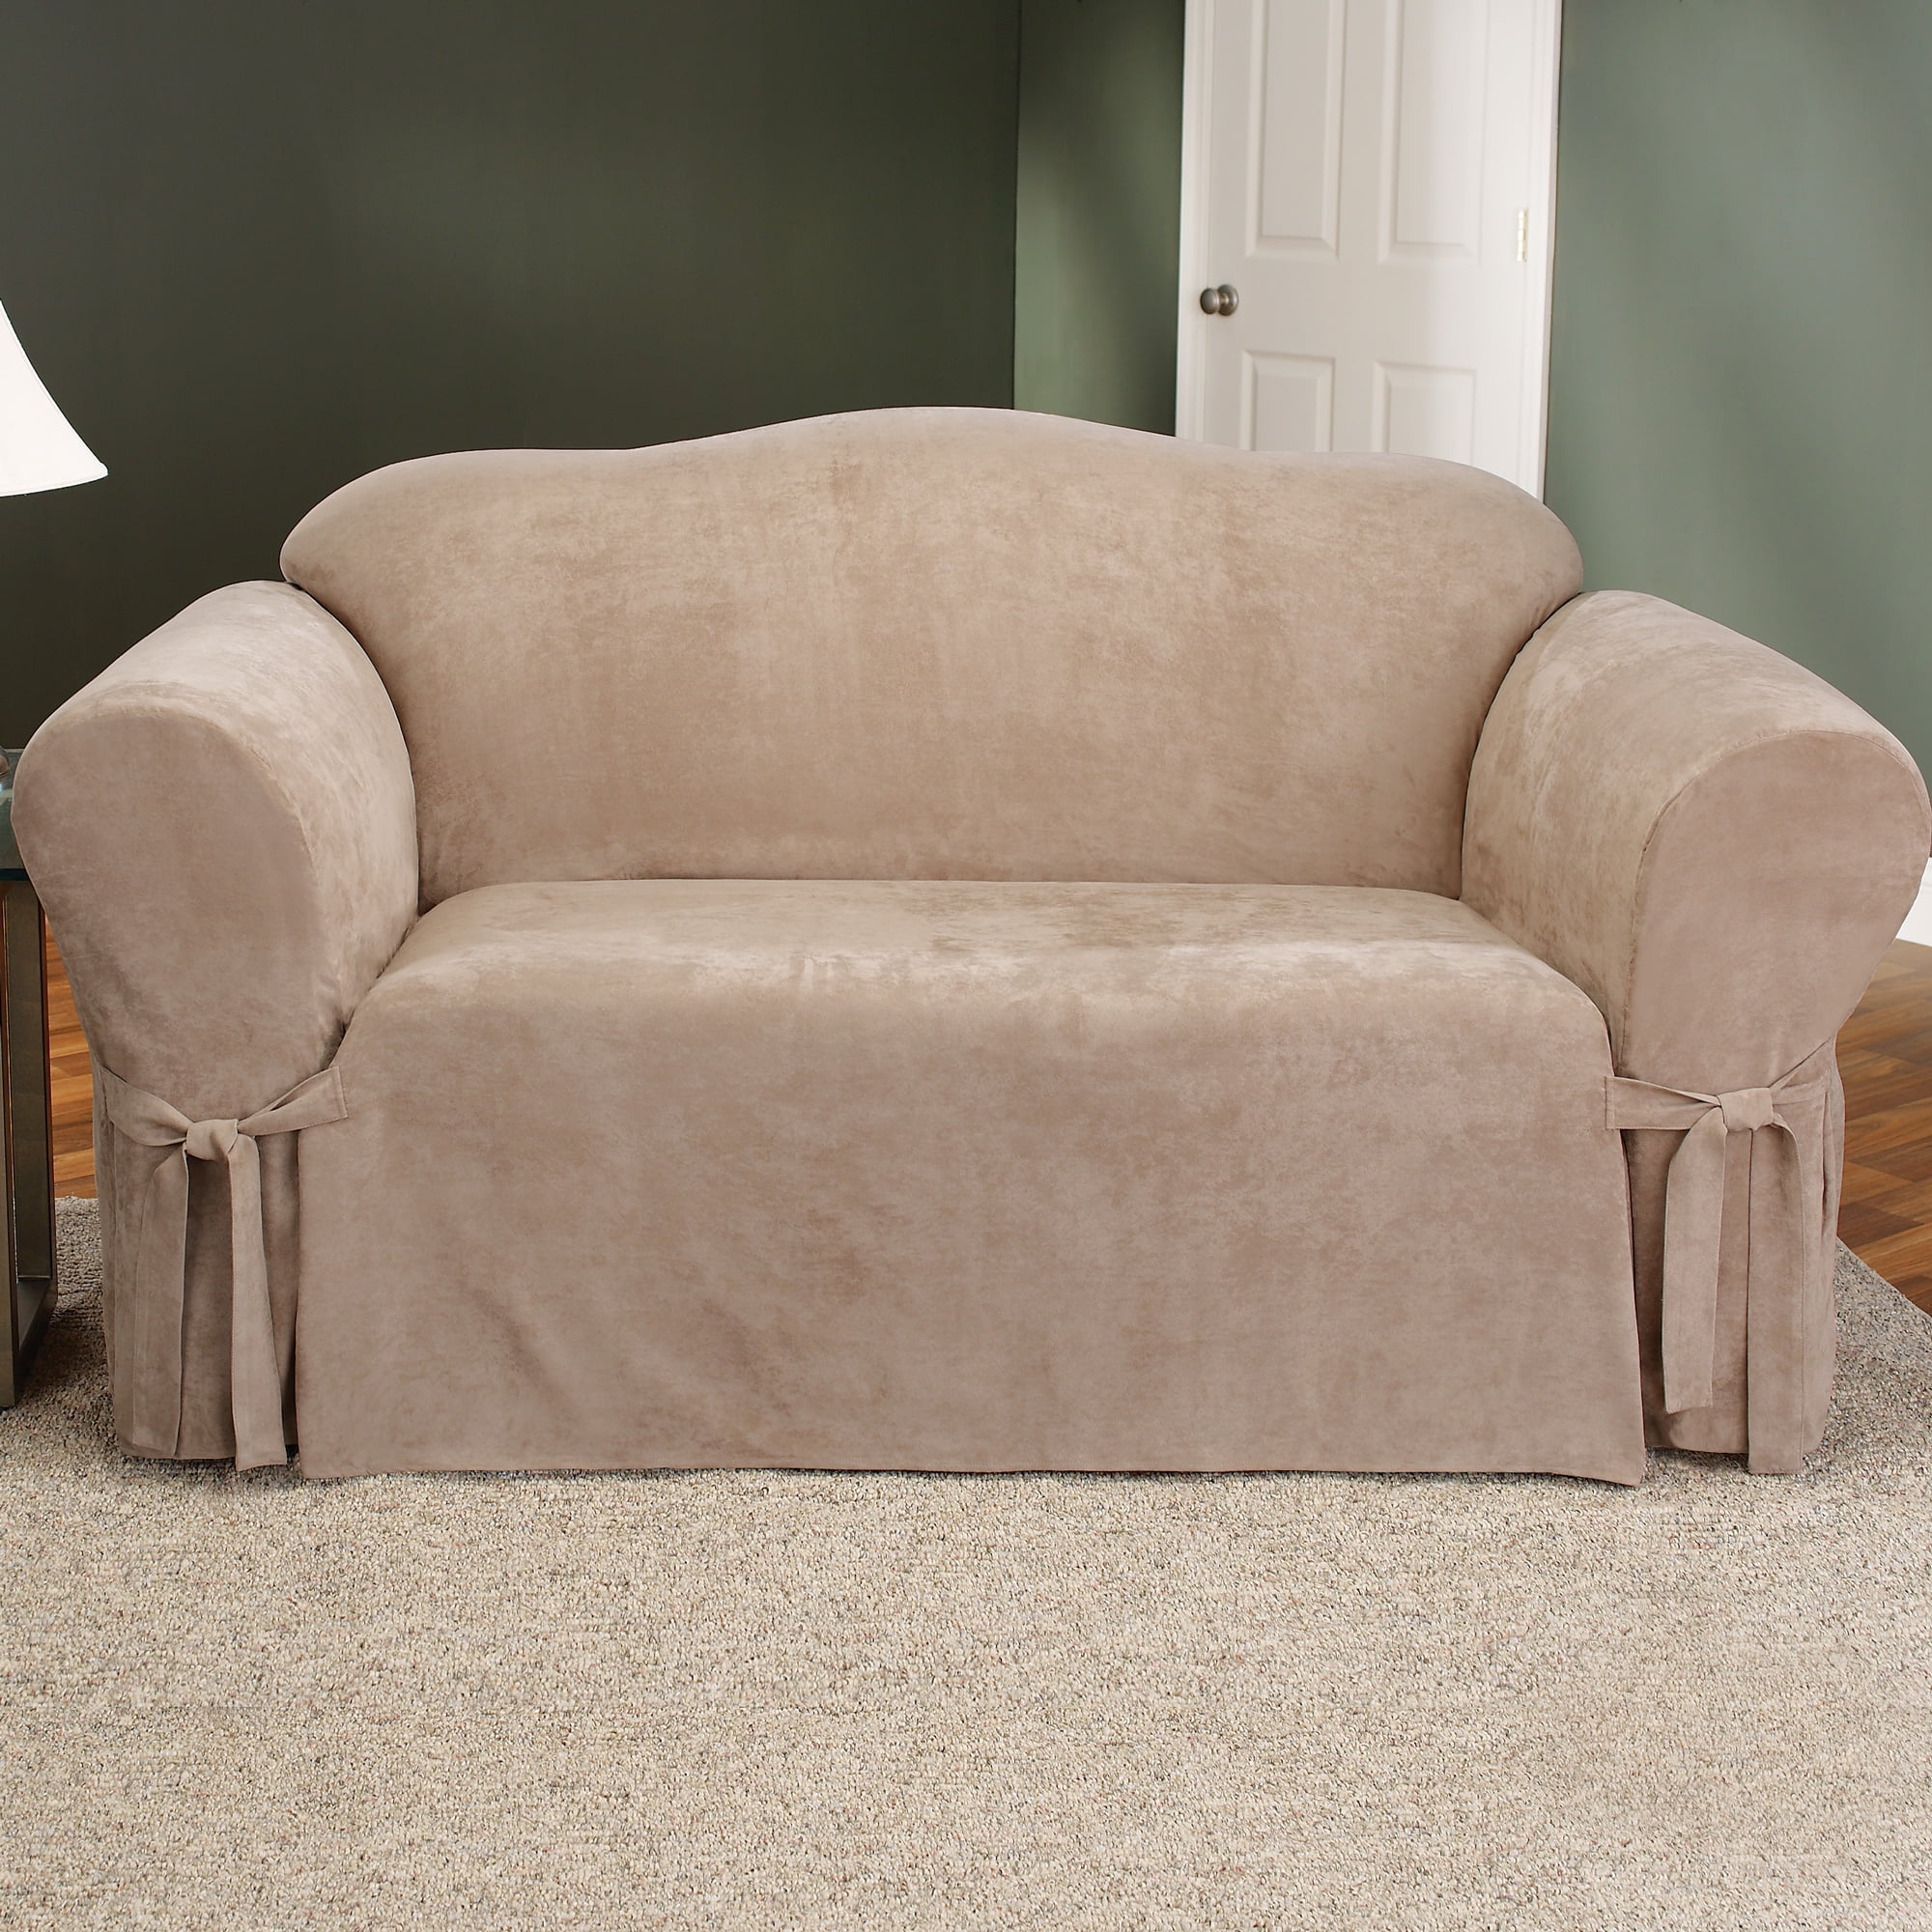 New In Package Sure Fit Soft Suede 1-Piece Loveseat Slipcover cream 